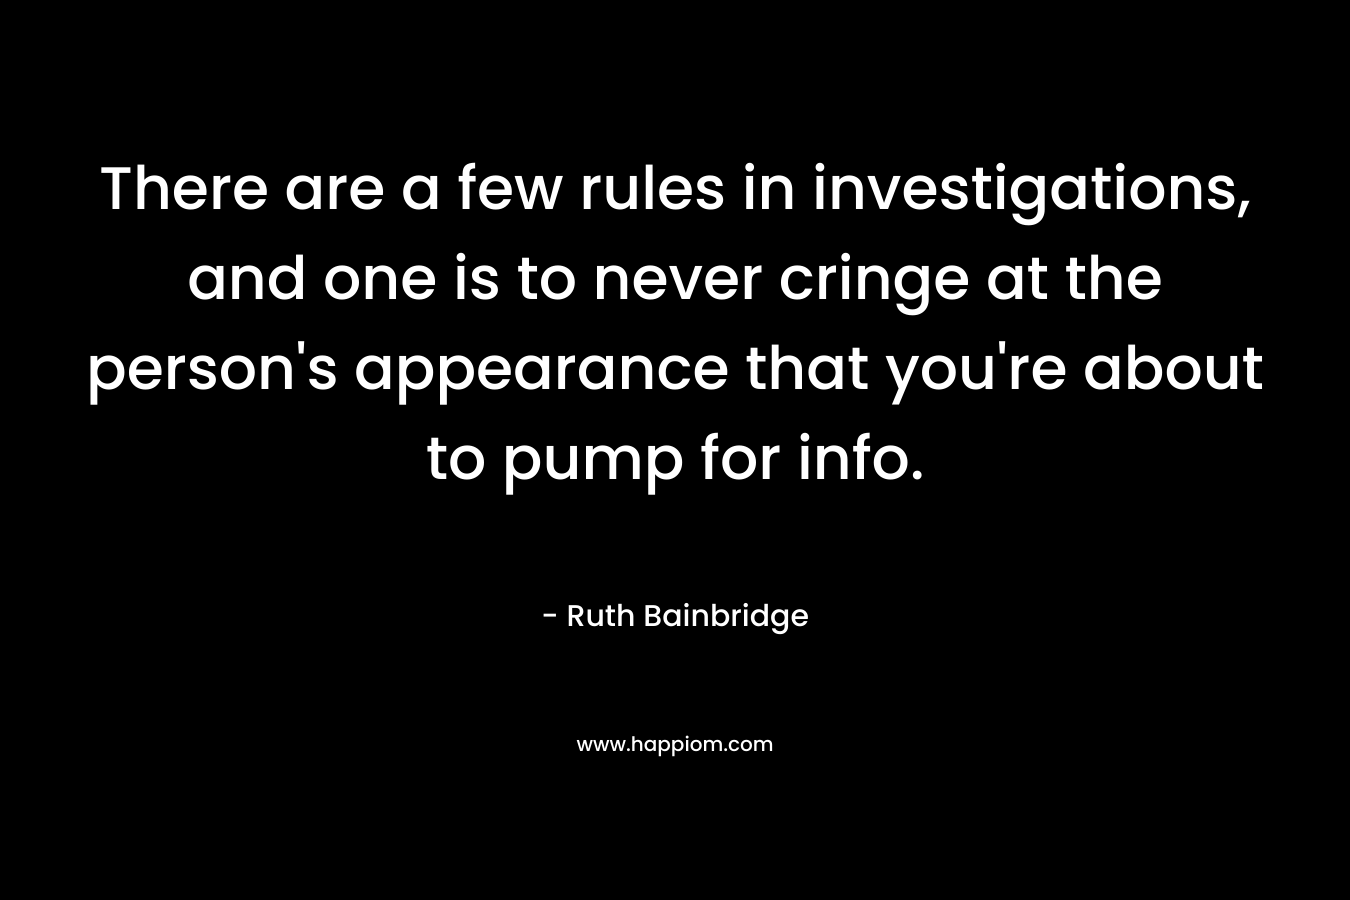 There are a few rules in investigations, and one is to never cringe at the person’s appearance that you’re about to pump for info. – Ruth Bainbridge